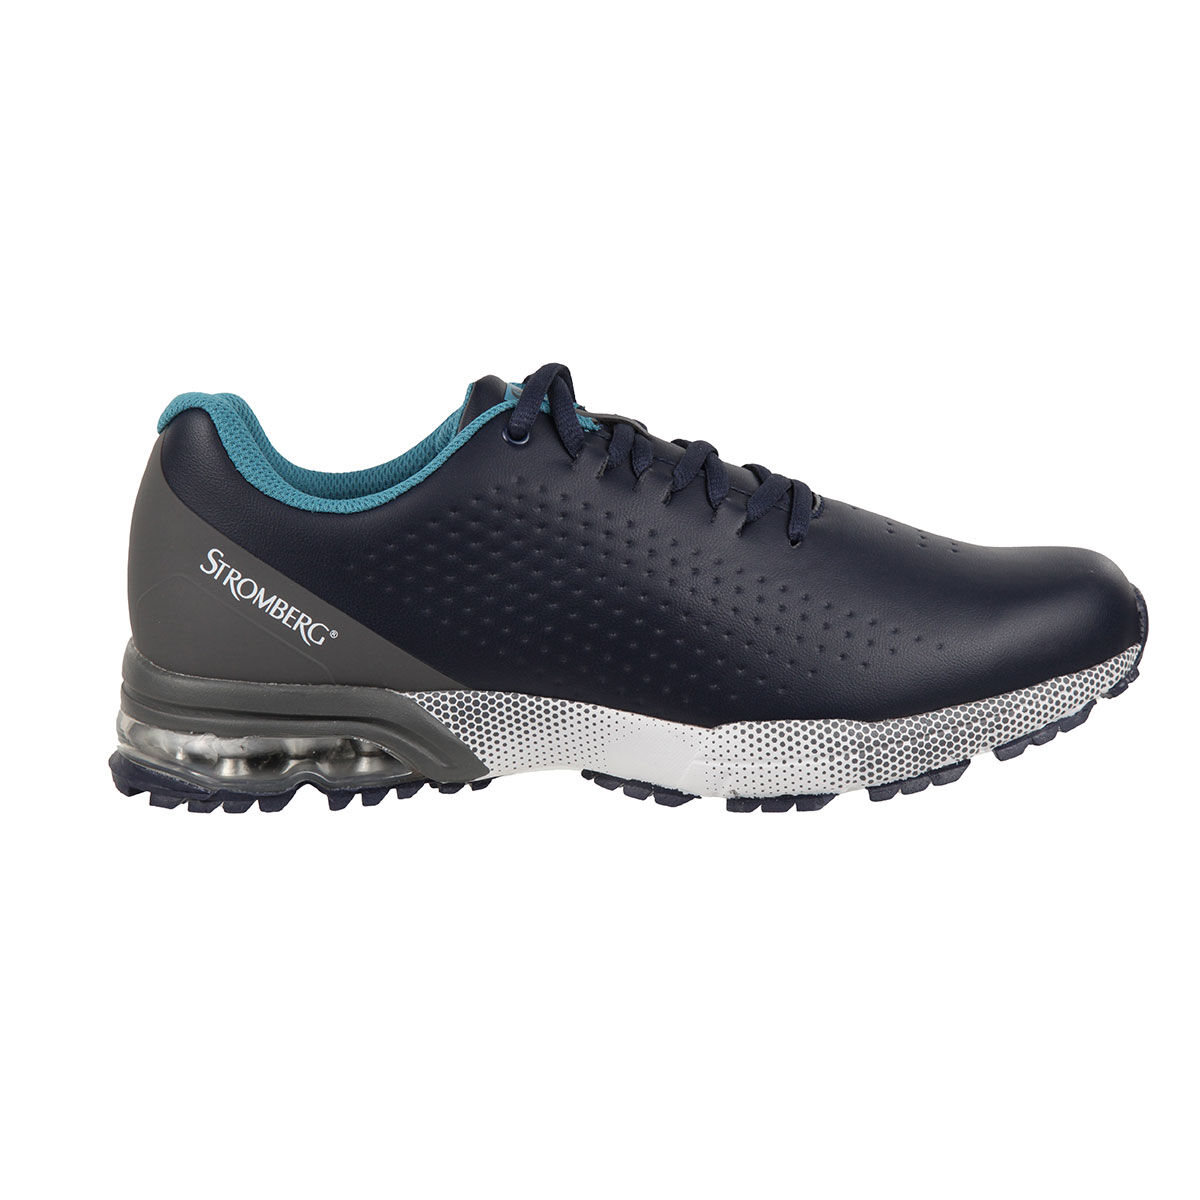 Stromberg Men's Ailsa Waterproof Spikeless Golf Shoes, Mens, Navy/blue, 7 | American Golf - Father's Day Gift von Stromberg